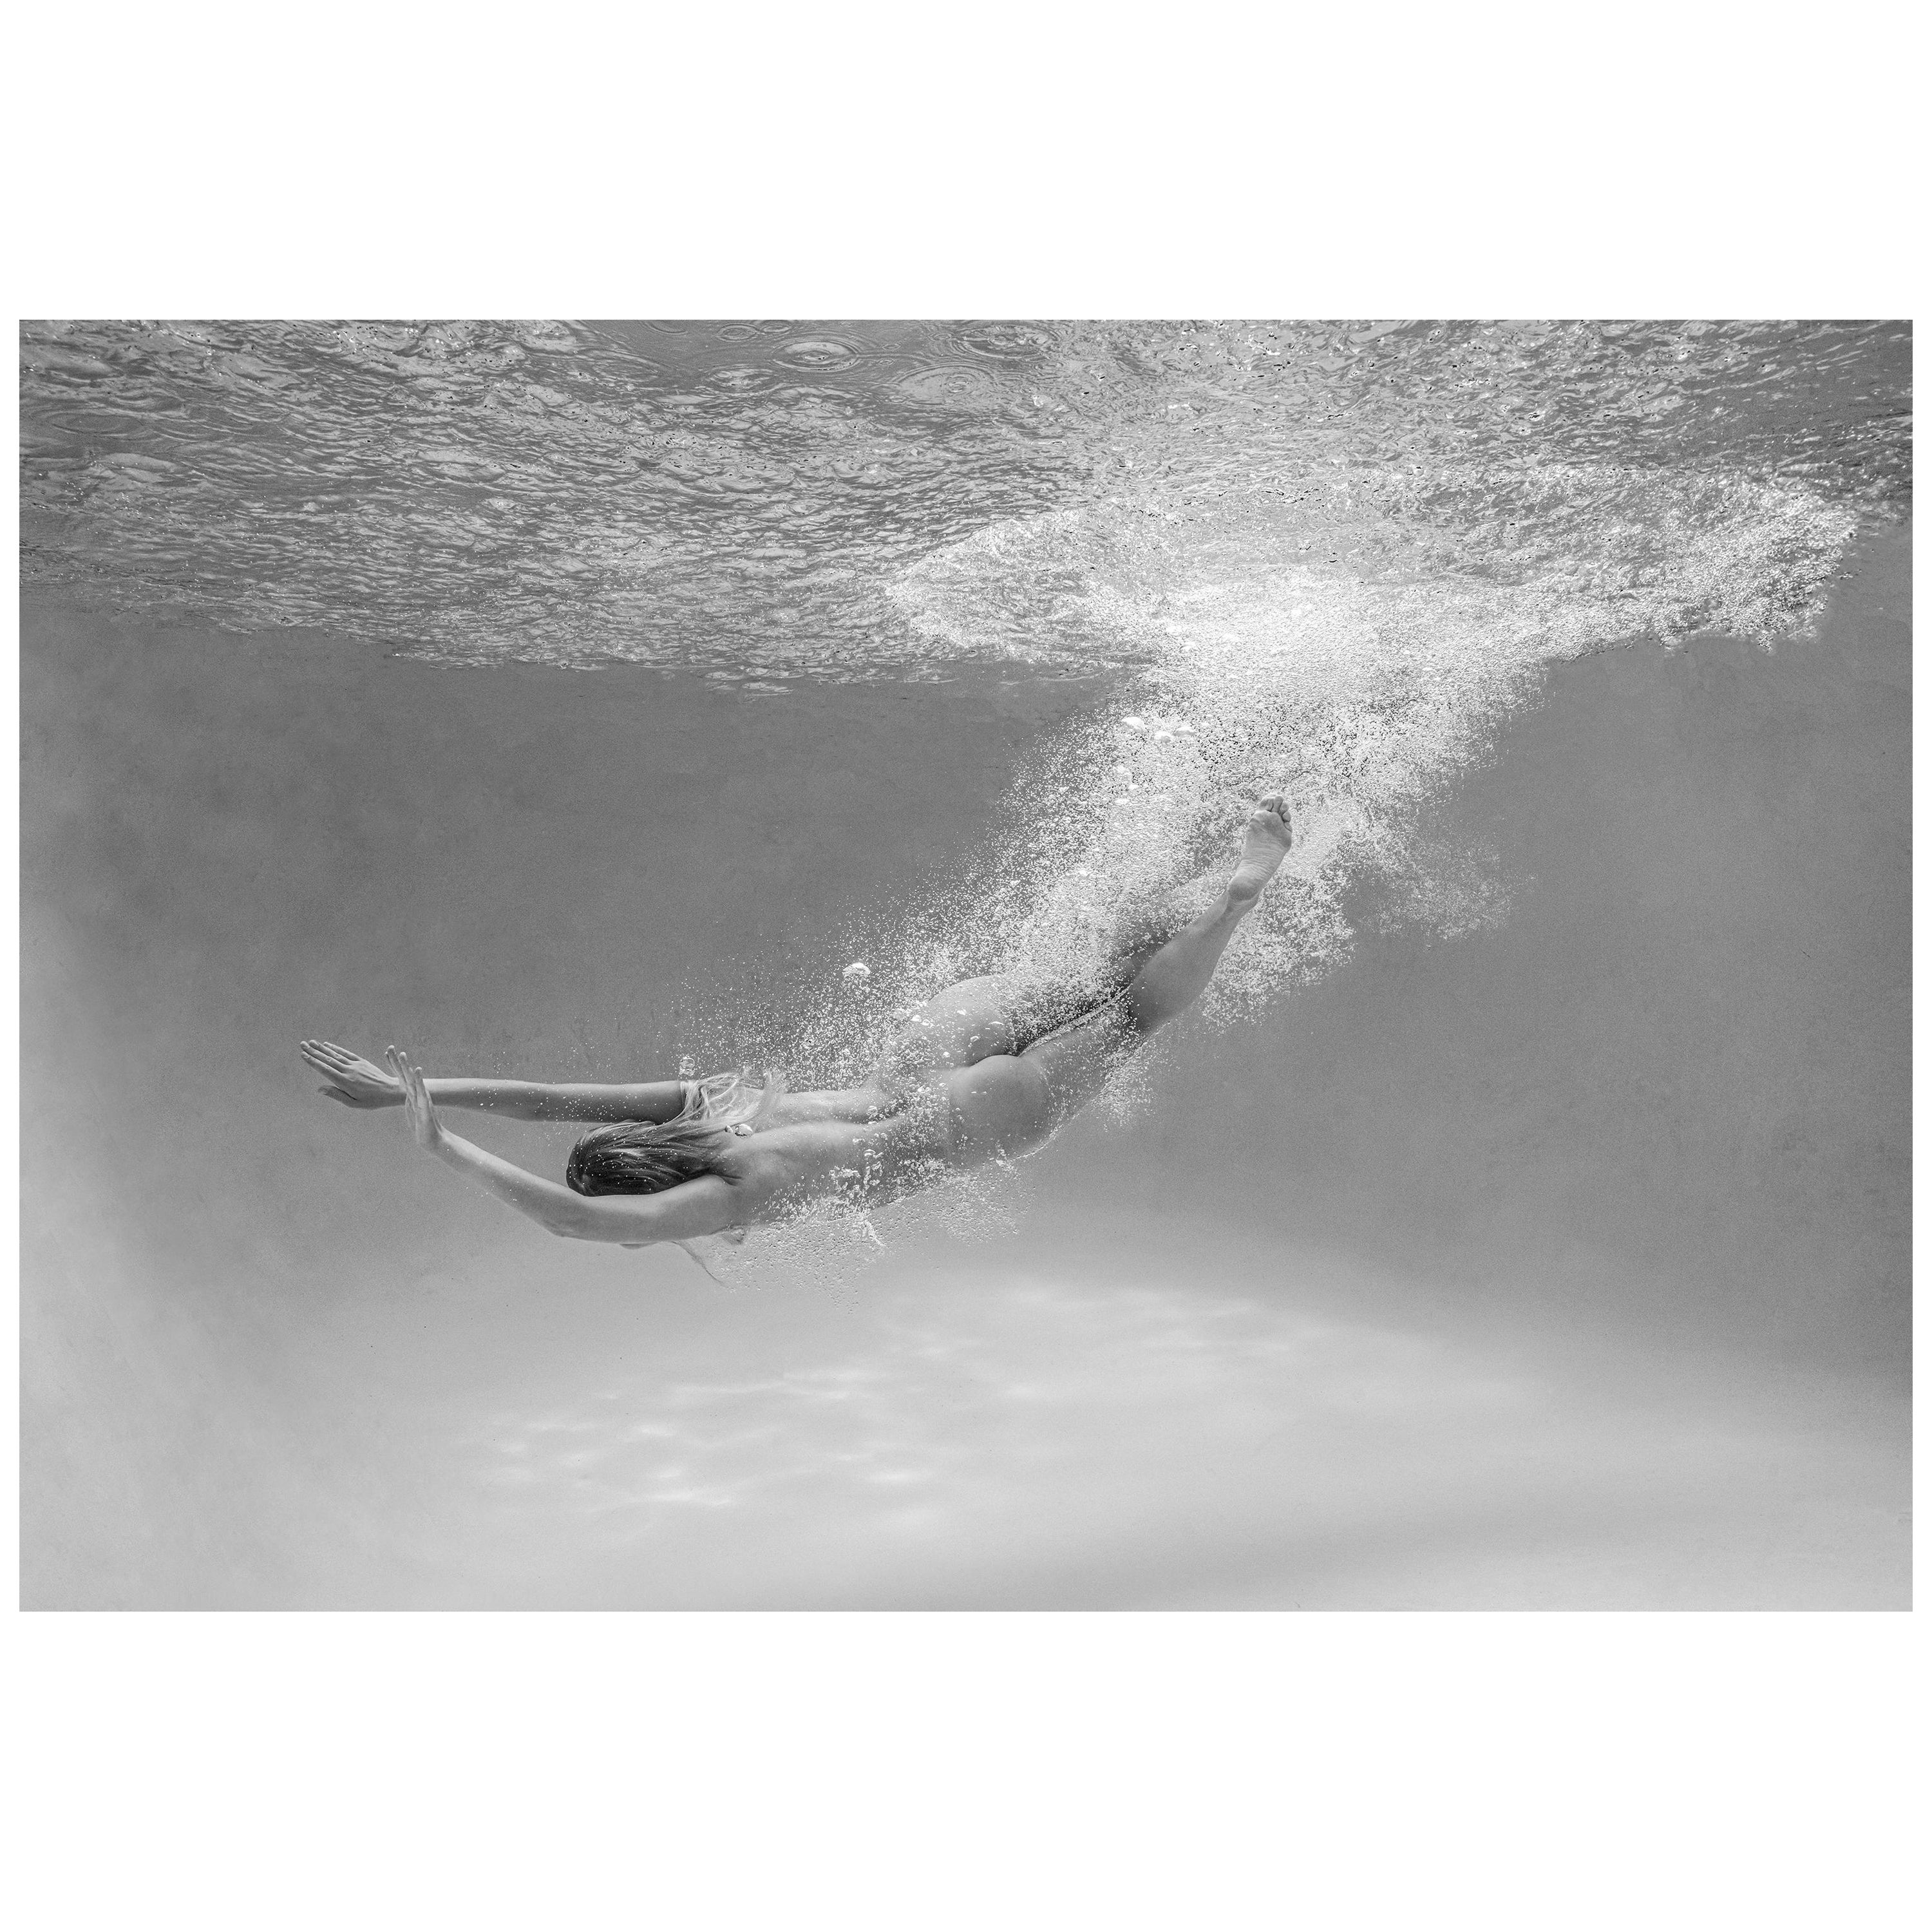 Alex Sher Black and White Photograph - Under - underwater black & white nude photograph - archival pigment print 17x24"